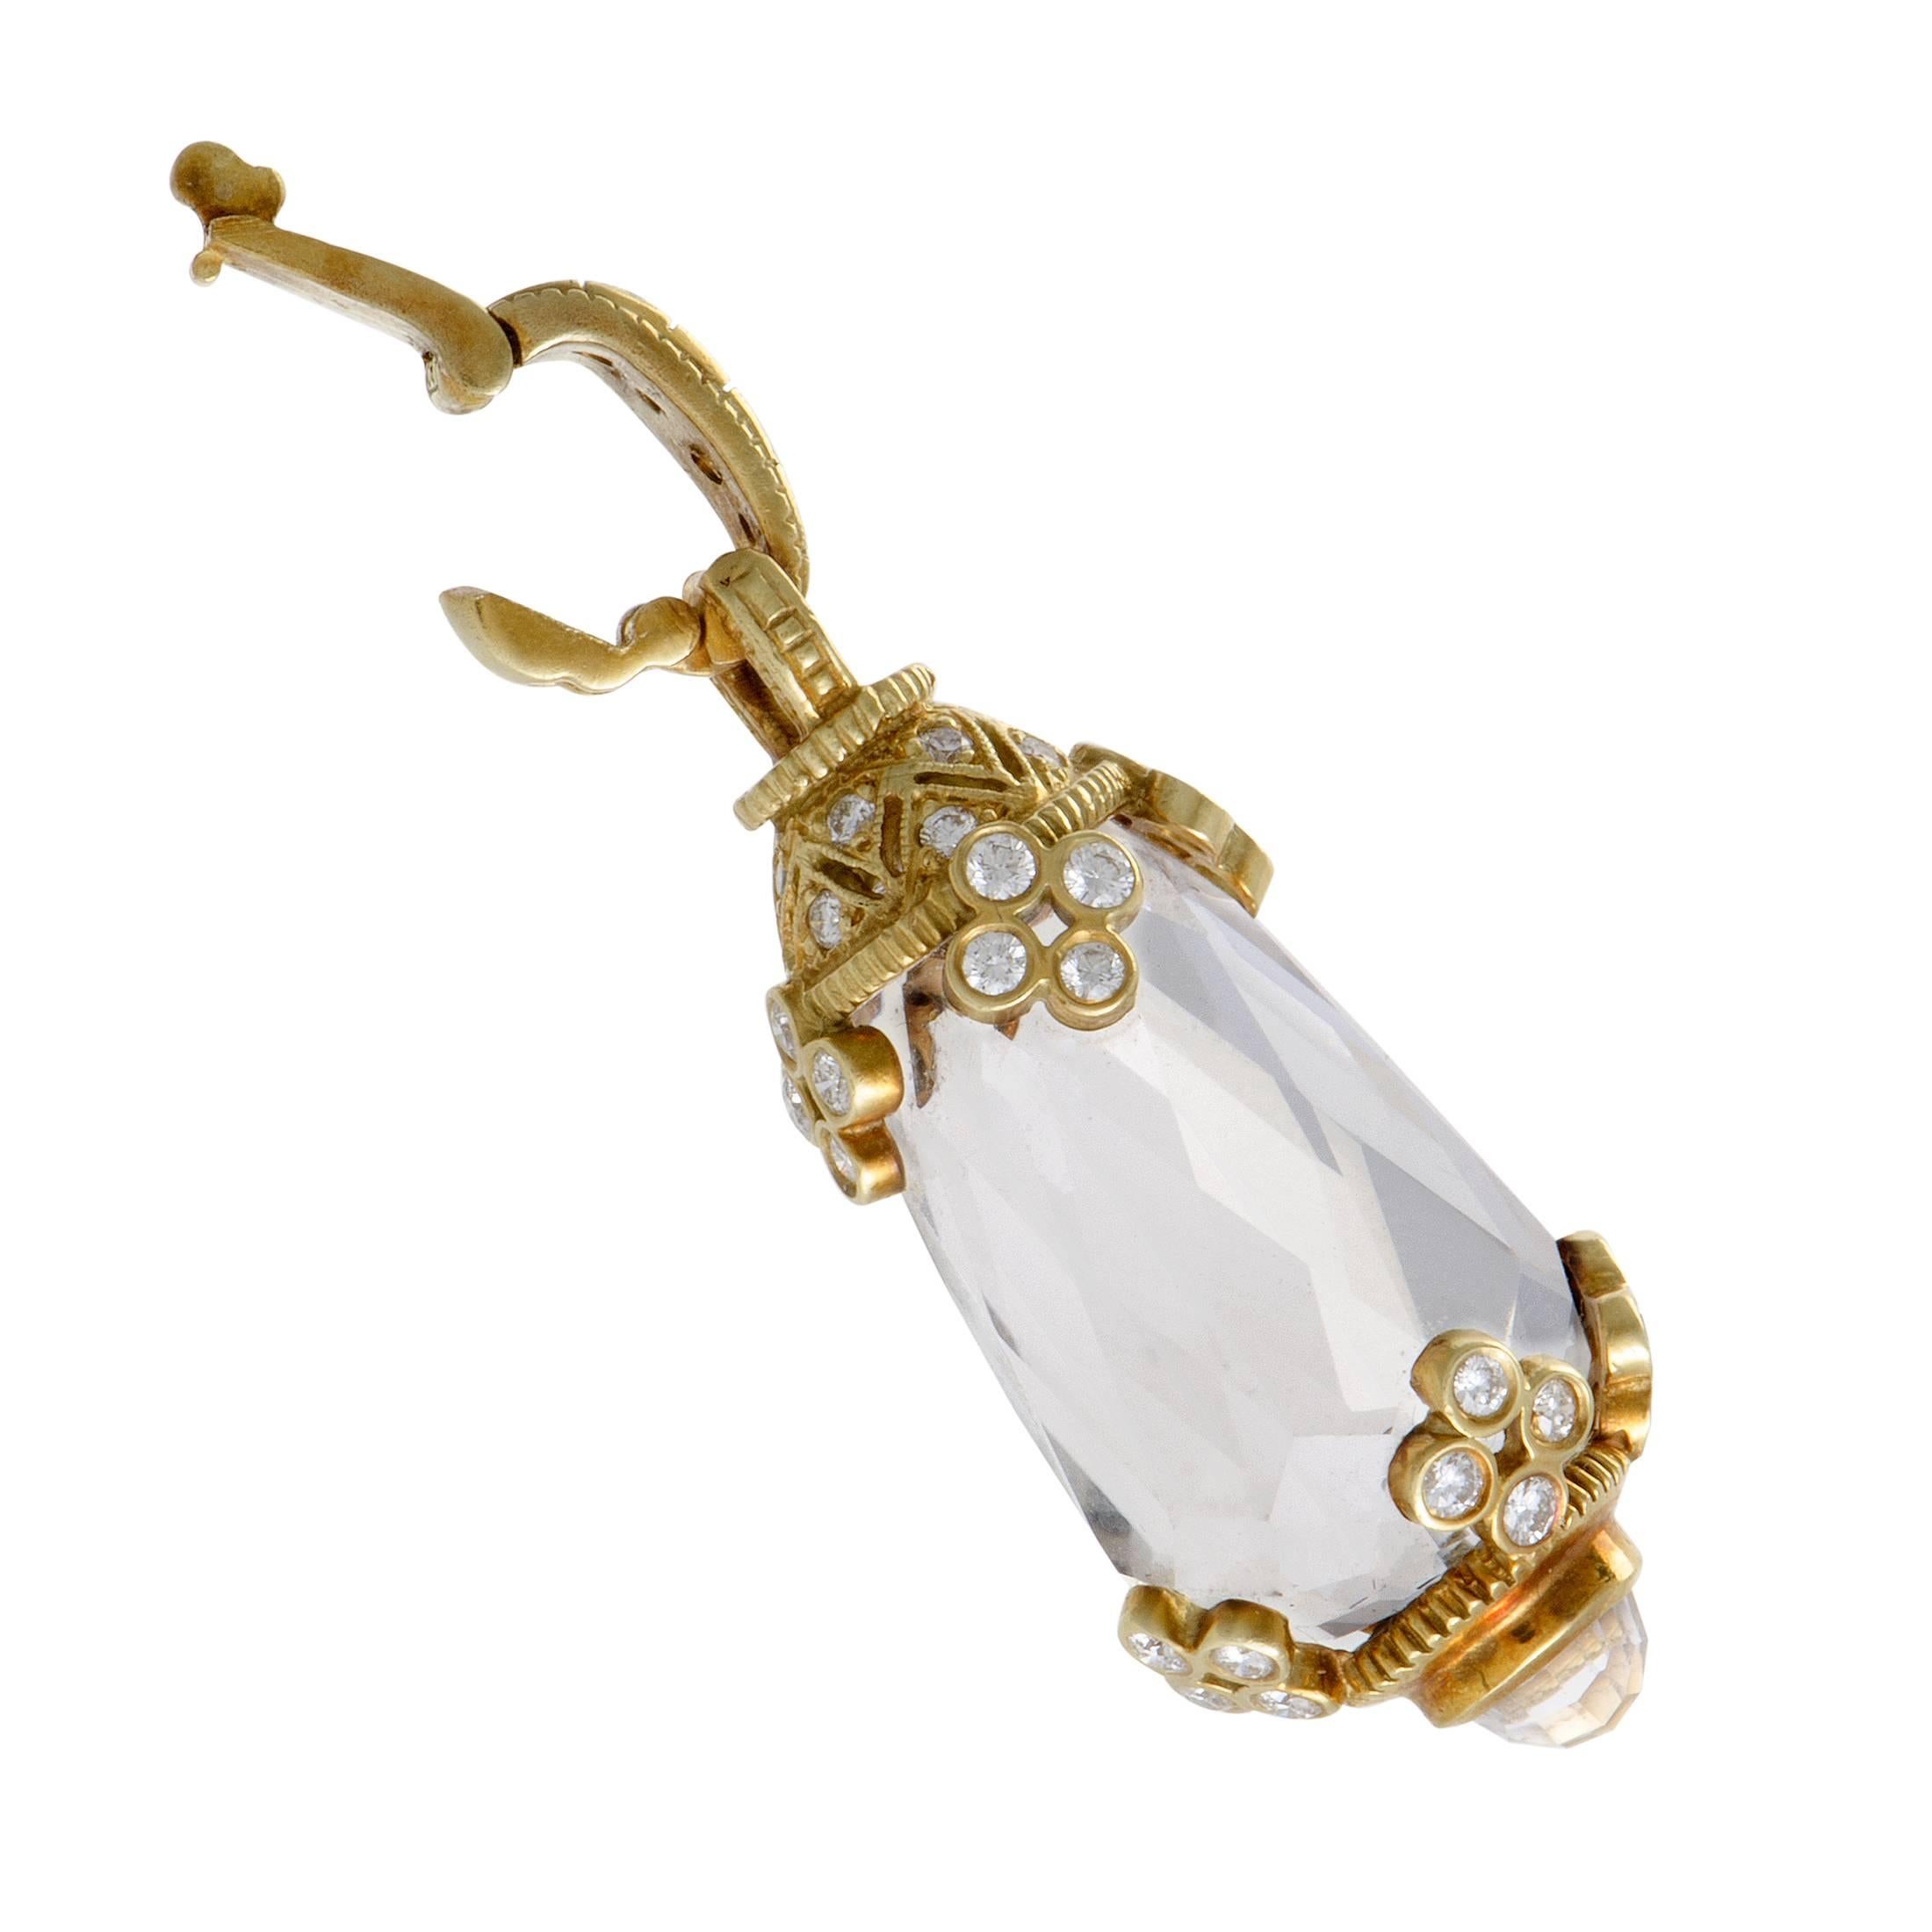 Providing fairy-tale-like vibes to the piece, the white quartz takes the central spot in this gorgeous Judith Ripka pendant made of quintessential 18K yellow gold. Along with luminous quartz, the pendant also boasts 0.88ct of very slightly included